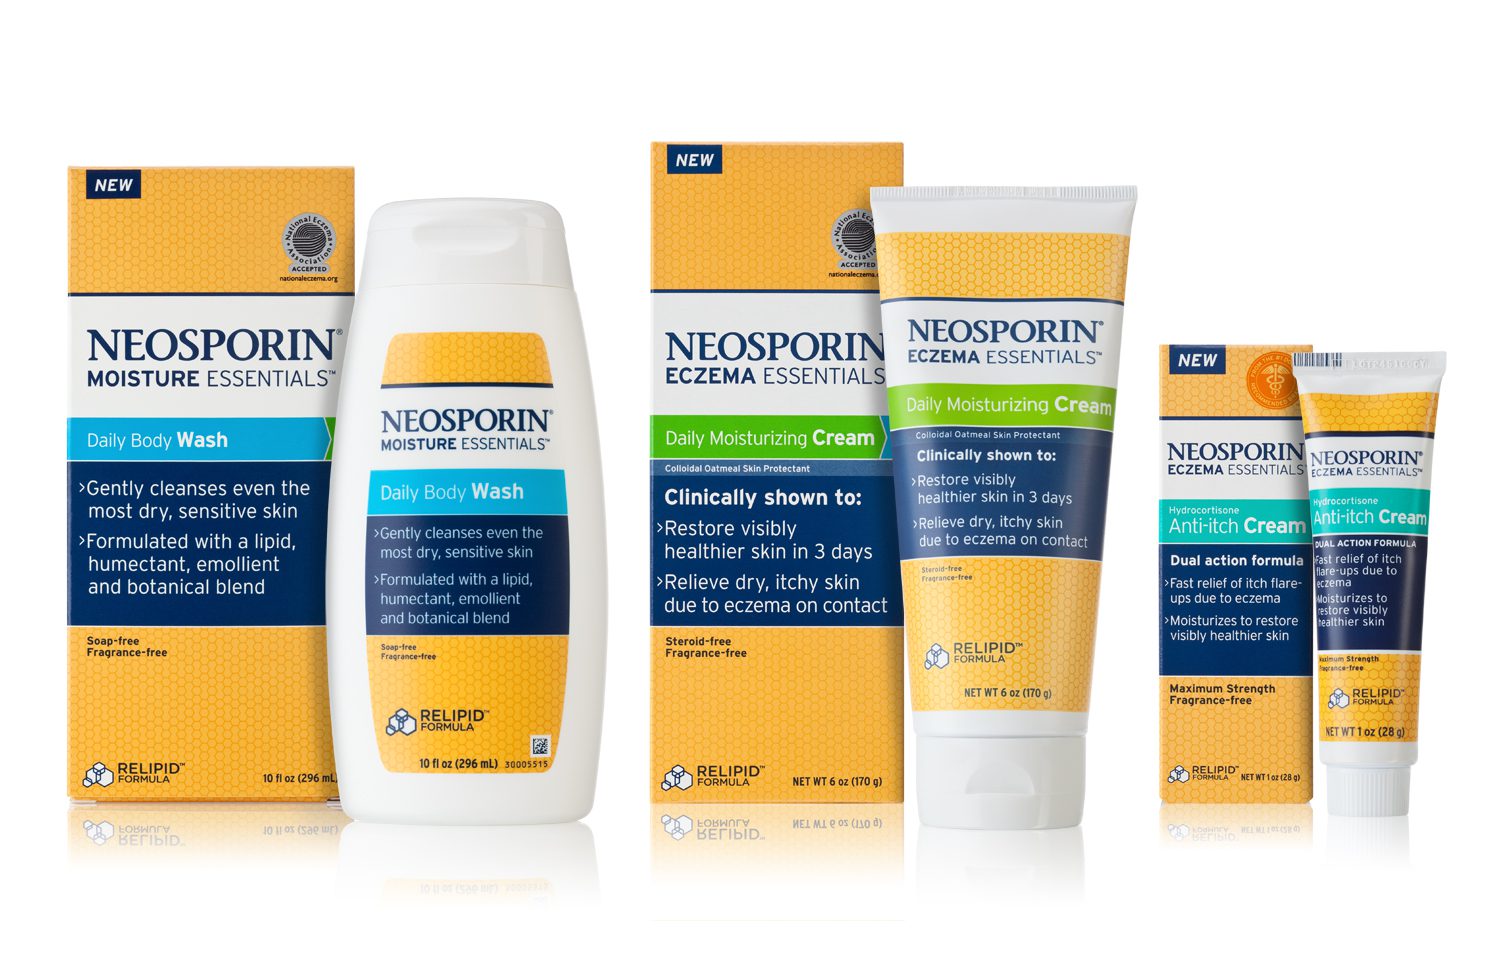 Neosporin Essentials Review & Giveaway (ends 8/27)